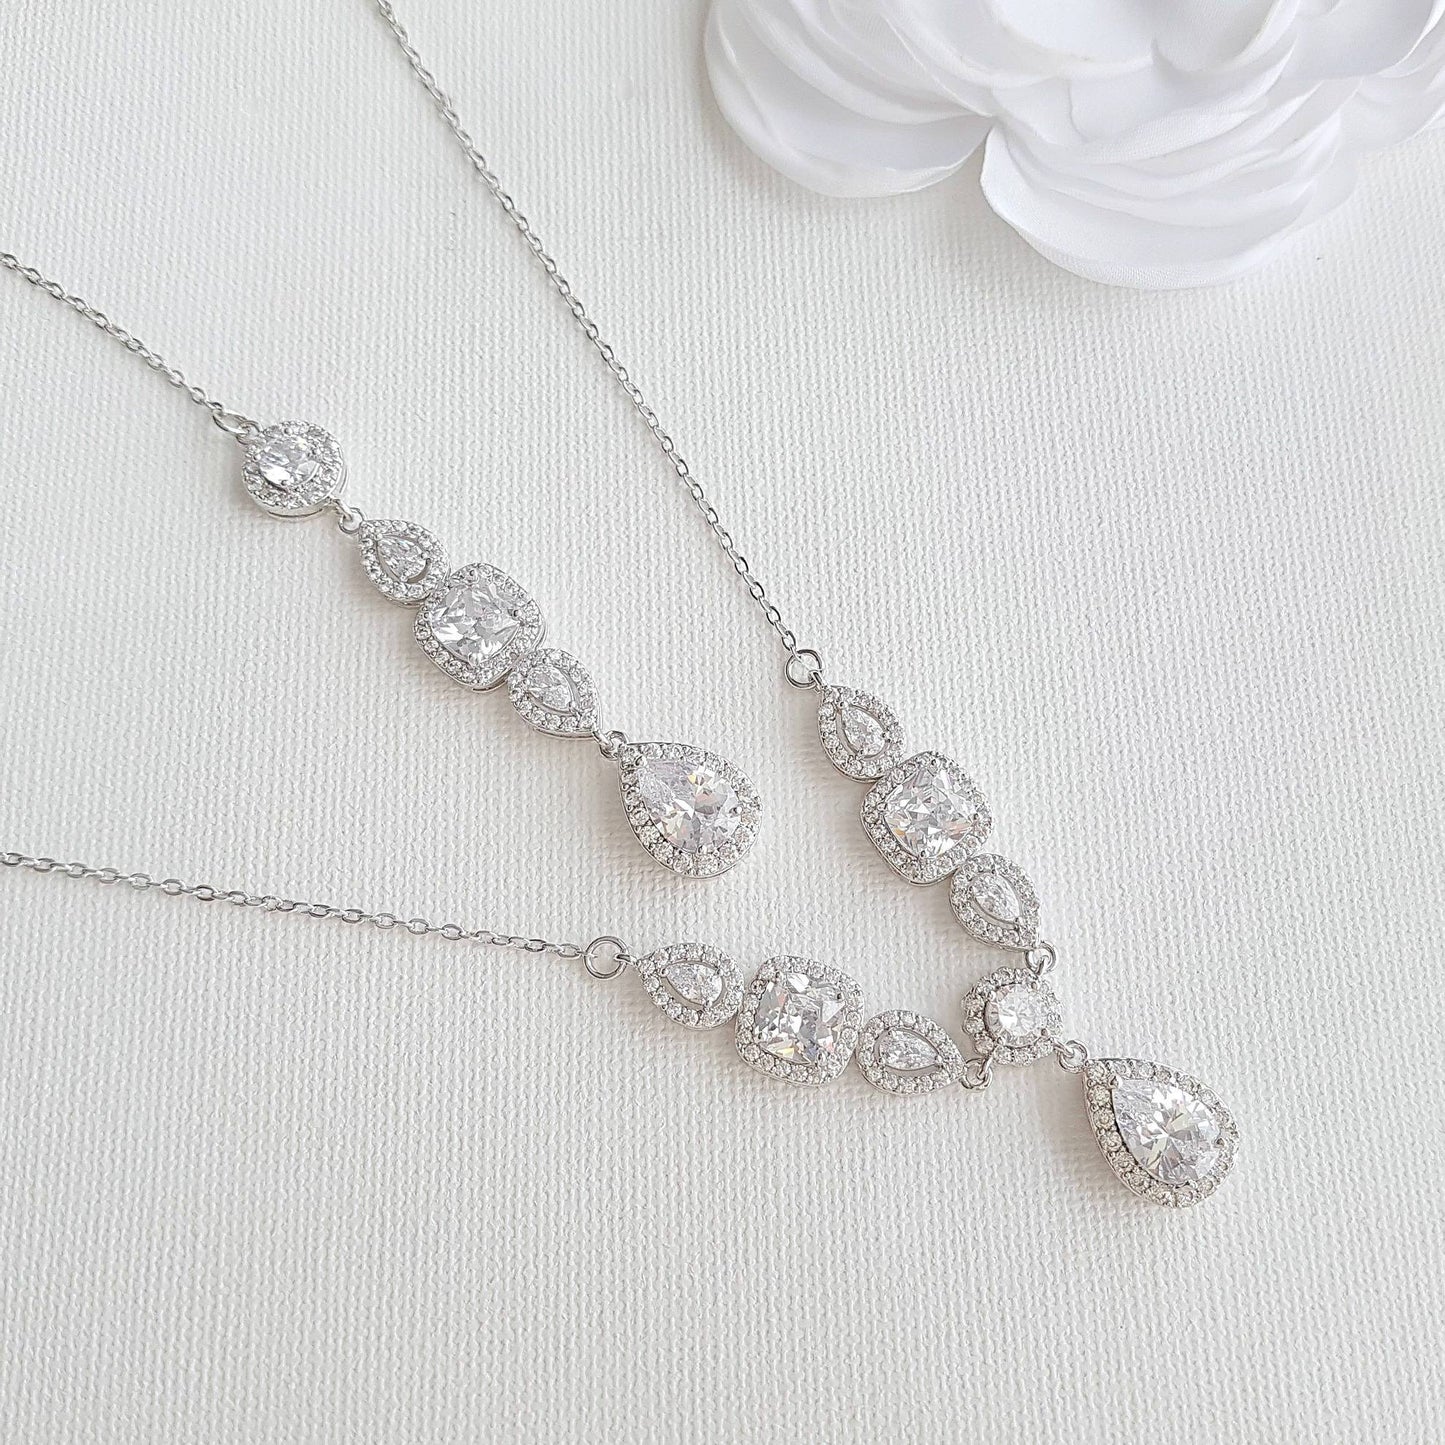 Bridal Drop Back Necklace- Gianna - PoetryDesigns